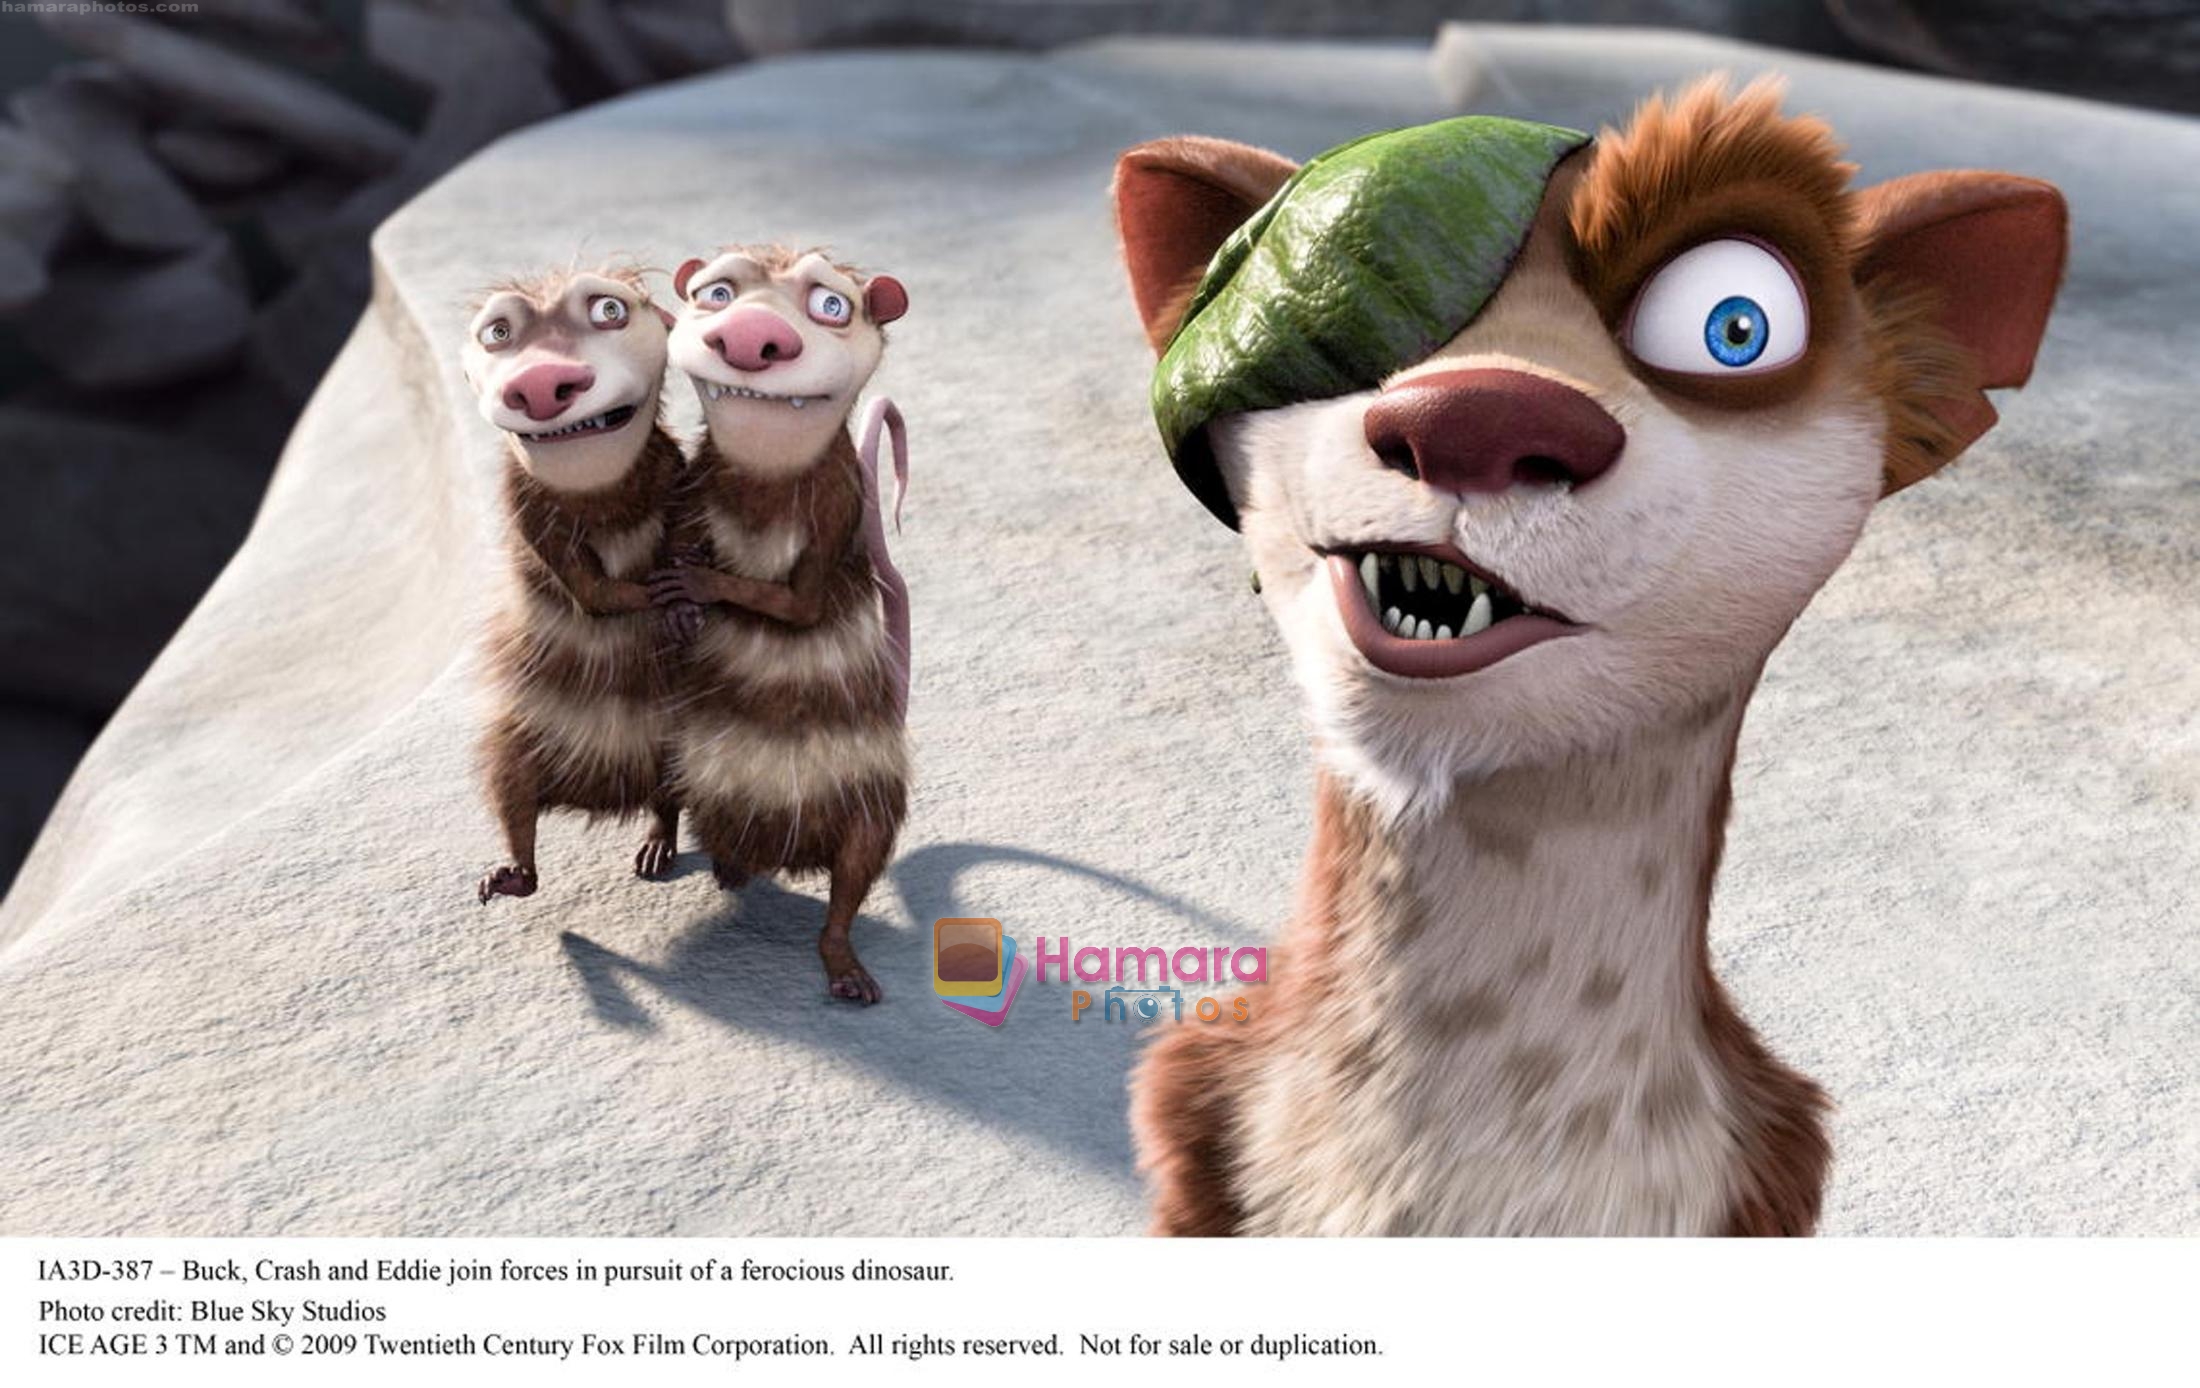 in the still from movie Ice Age 3 